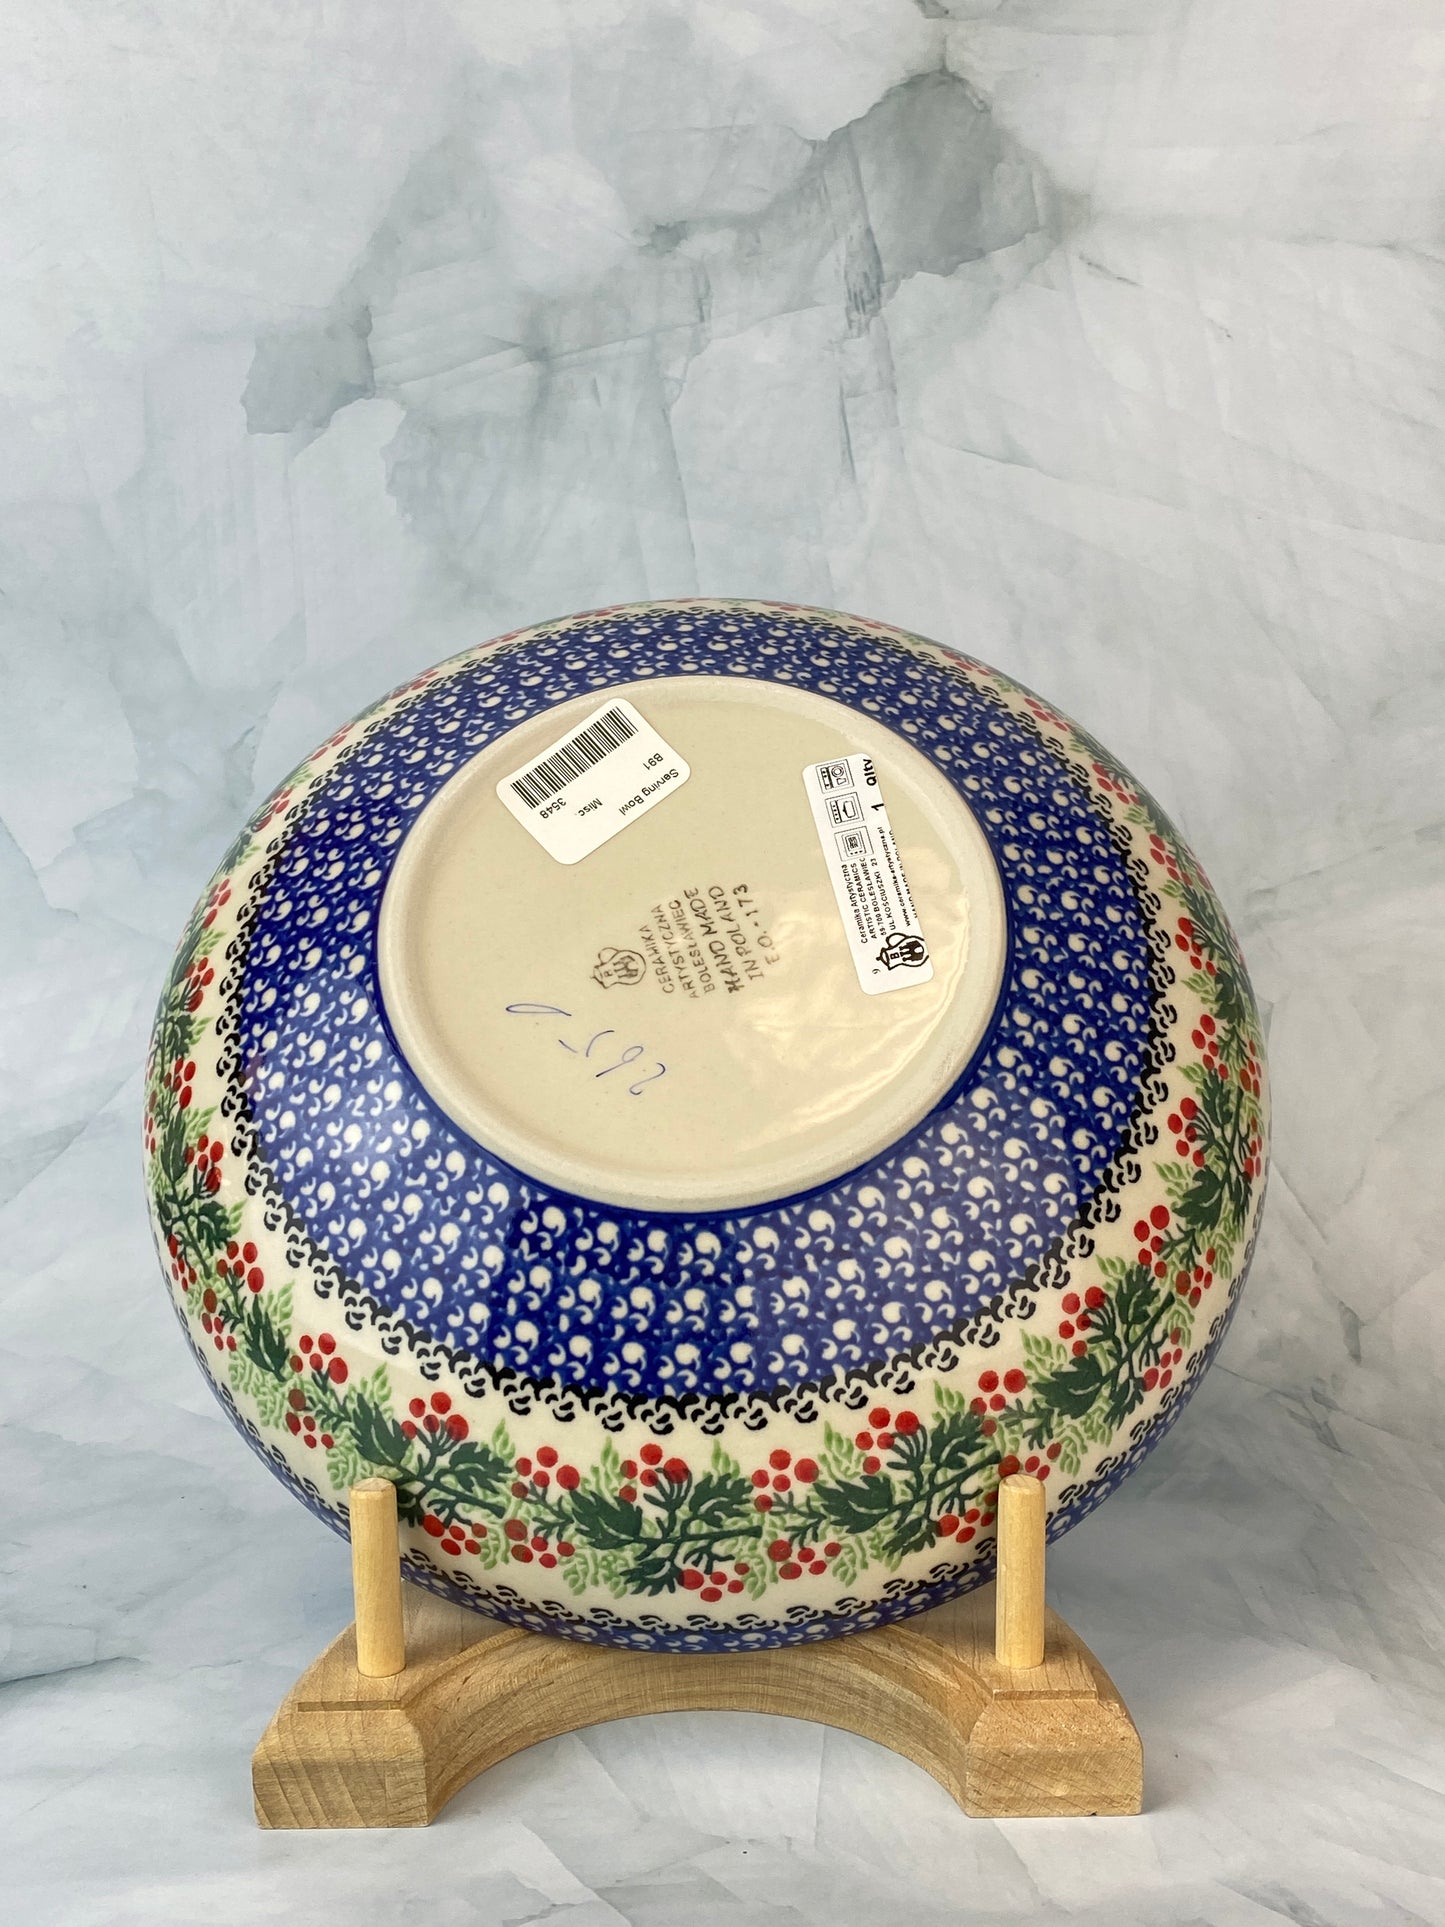 HOLIDAY SPECIAL 8.5" Serving Bowl - Shape B91 - Pattern 2650